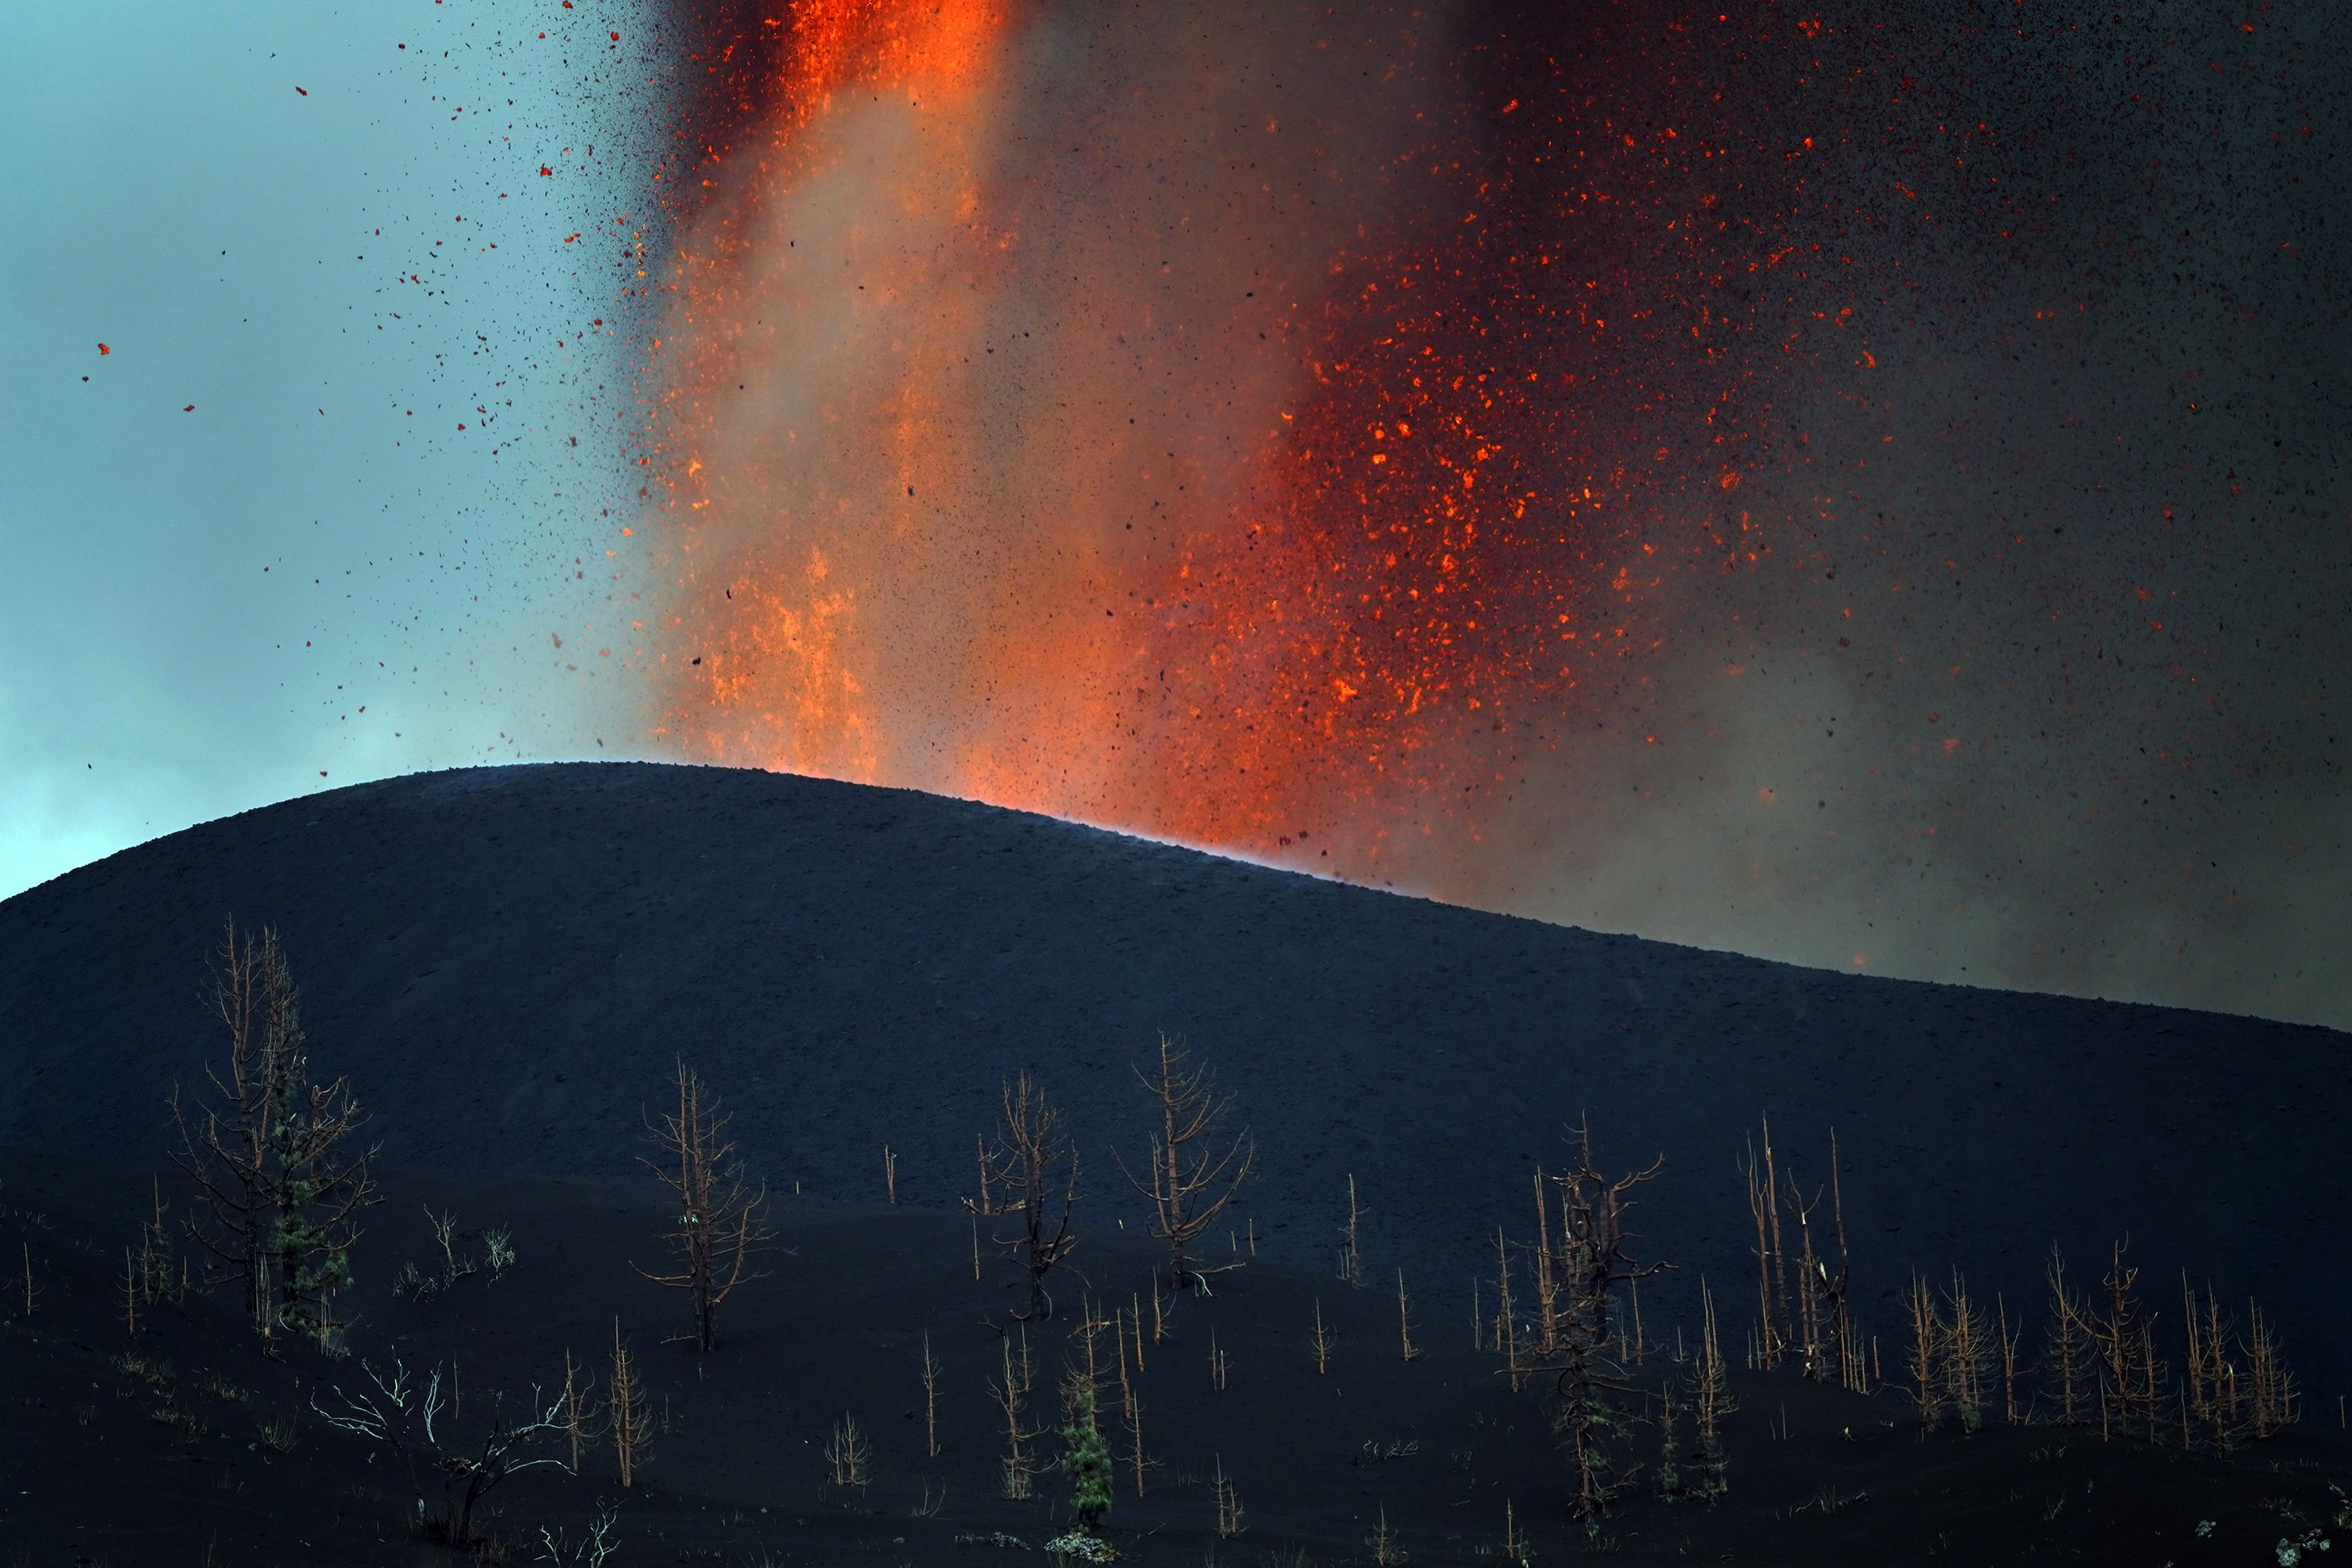 La Palma volcano takes a break from blowing its top, then bursts into action again